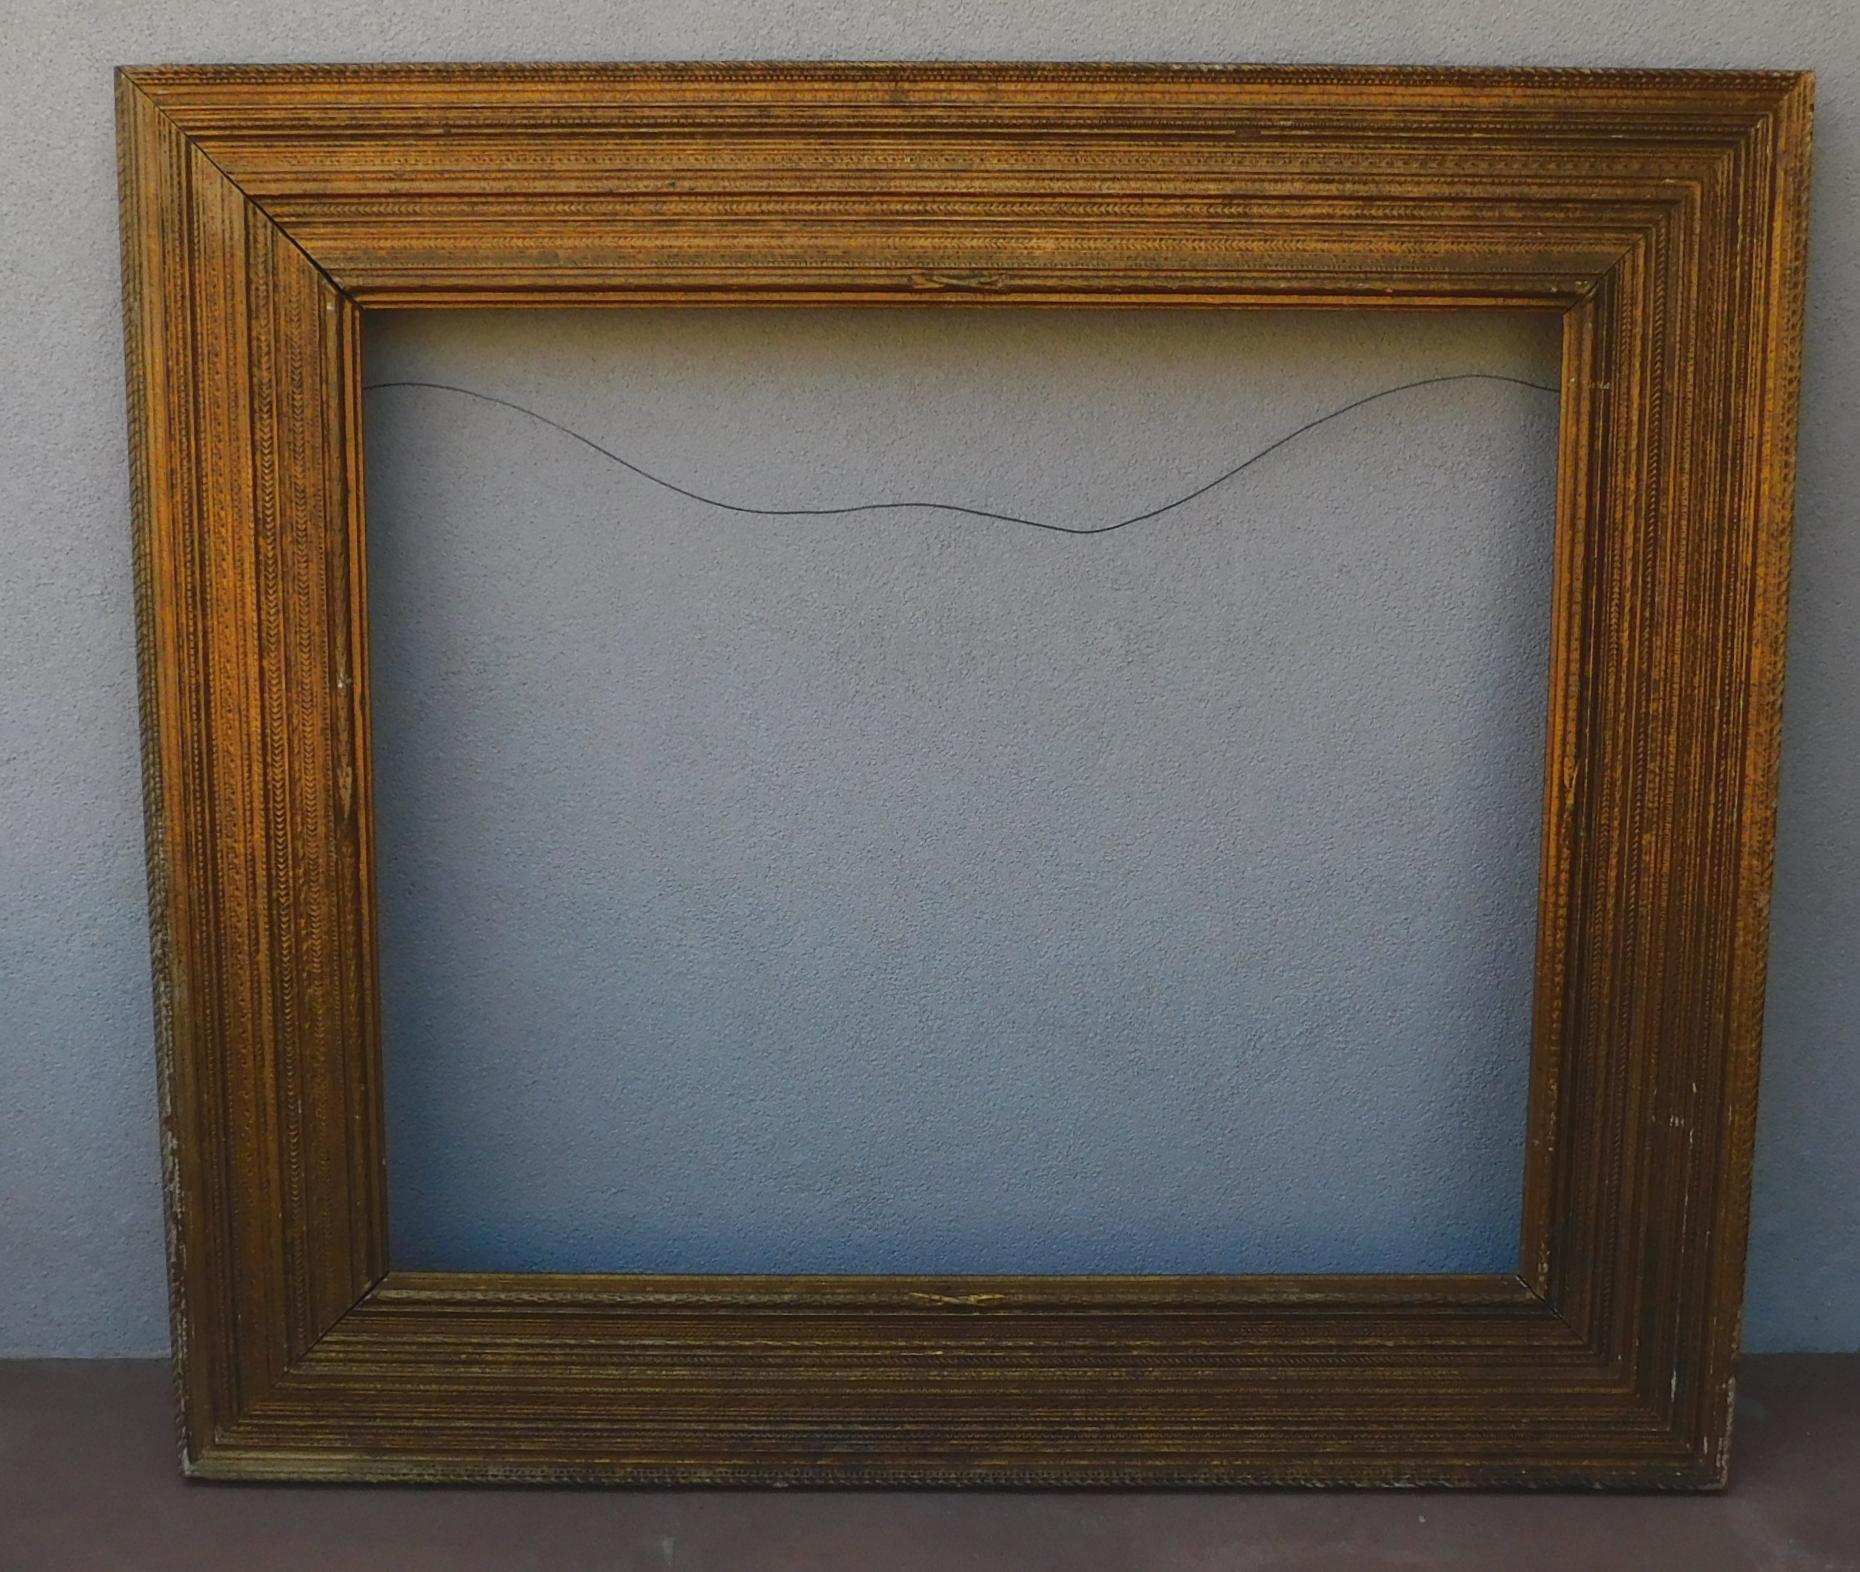 Wood Large Newcomb Macklin American Painting Frame Stanford White Design, 1915 - 1920 For Sale